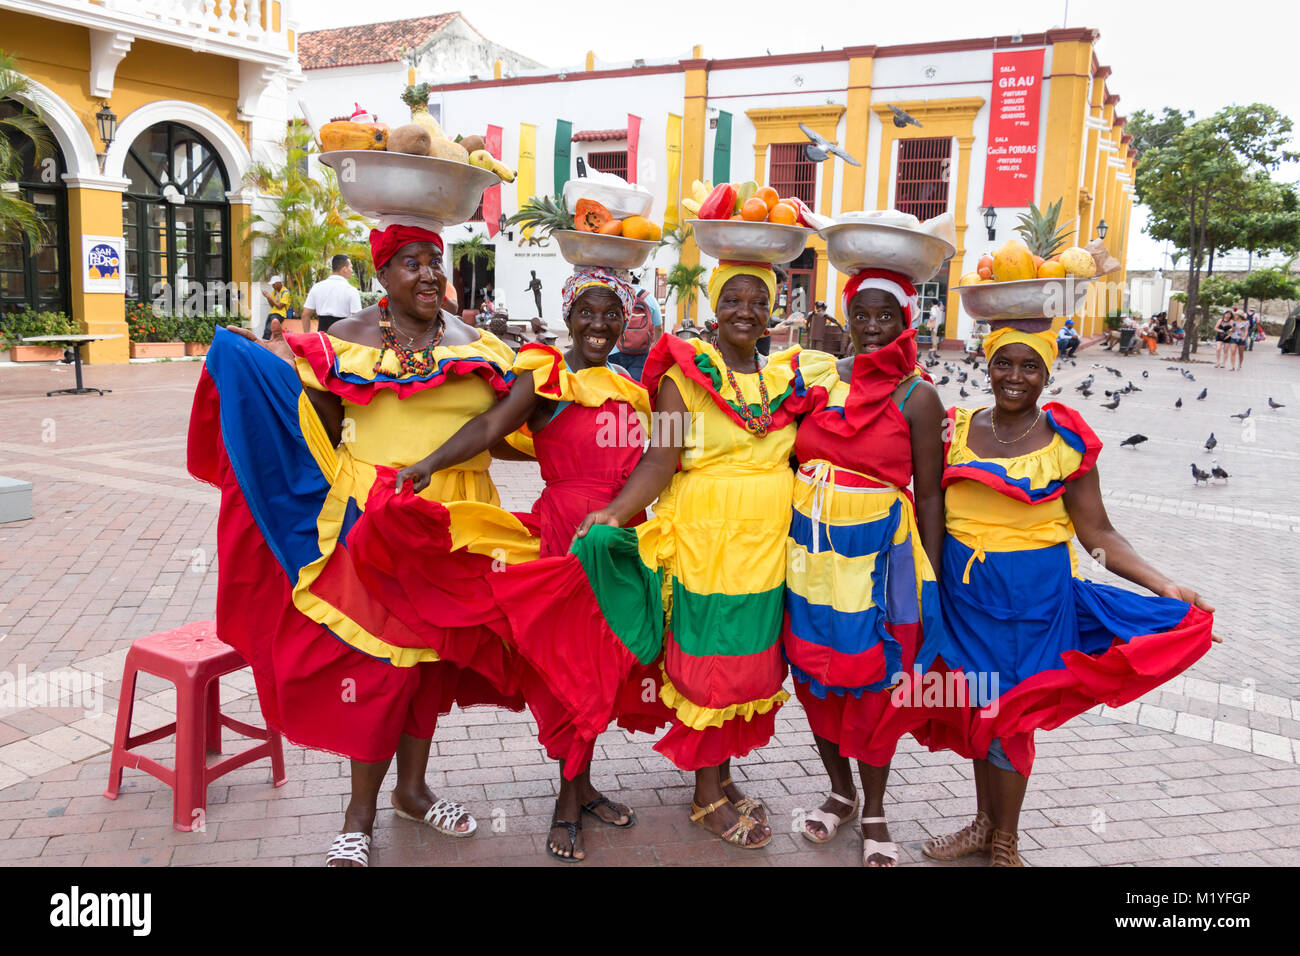 Cartagena, Colombia - January 23th, 2018: Five palenqueras with a metal basket with fruits are posing showing their multicolor traditional dress at th Stock Photo